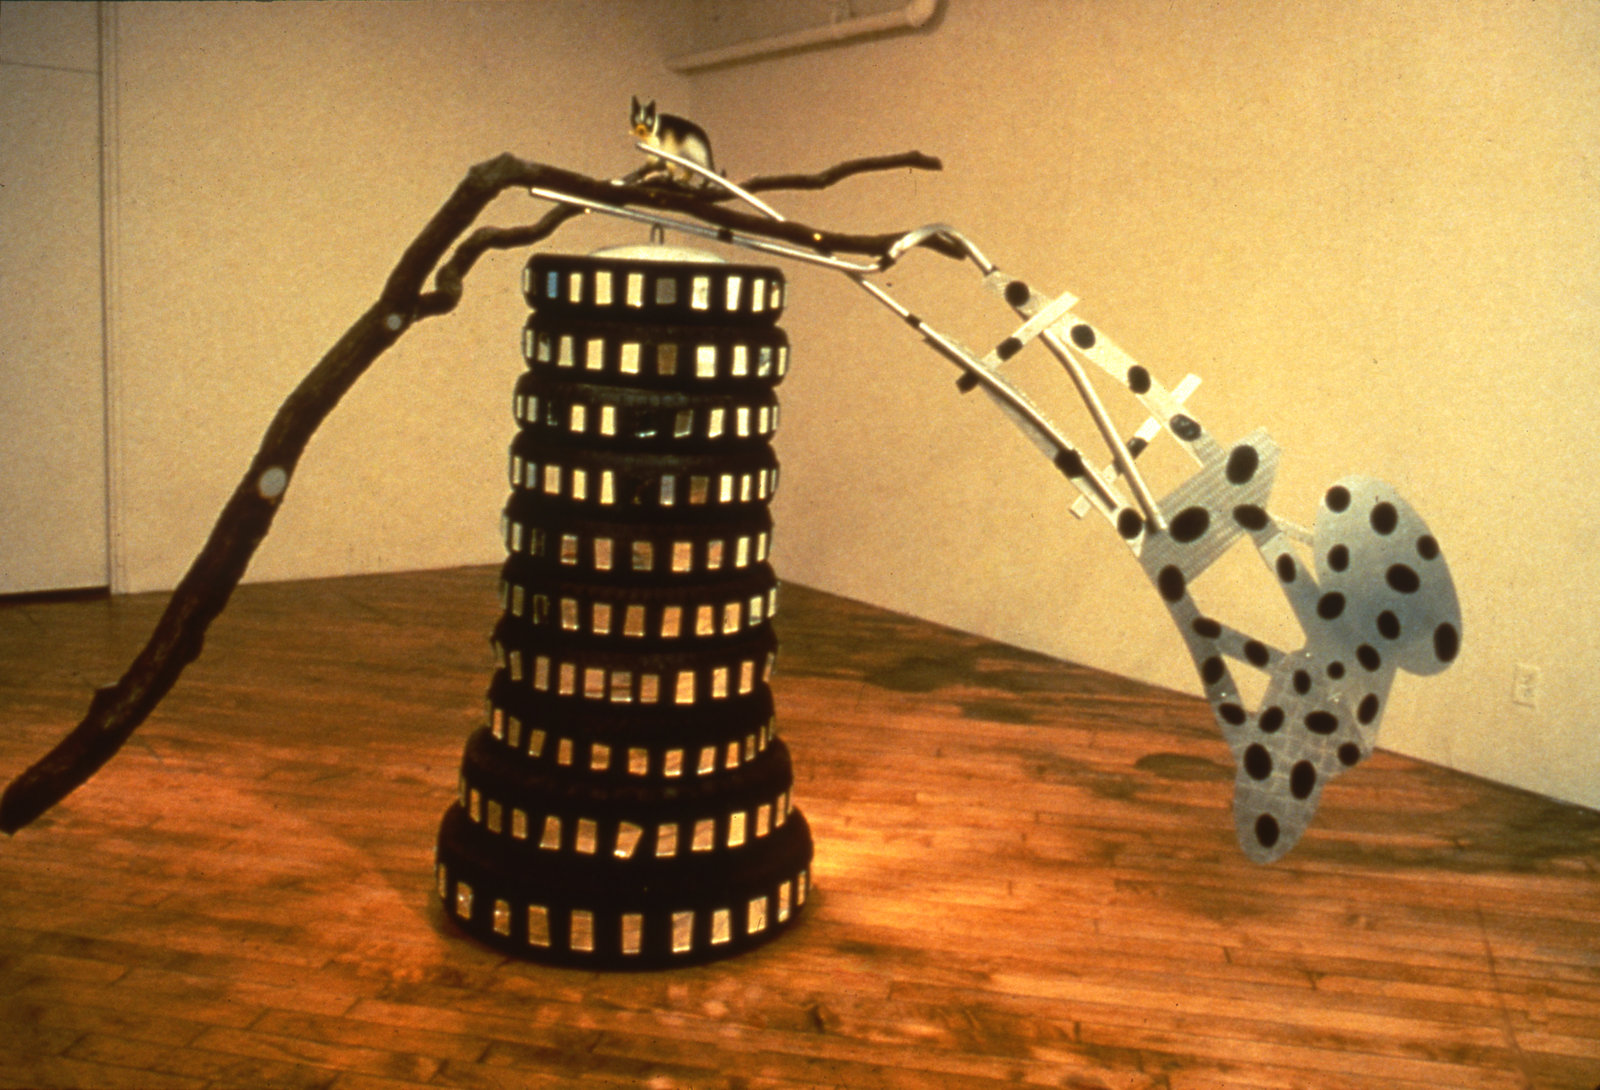 Jerry Pethick, Toy Tower/Whose Limbs are we out on?, 1985, rubber tires, aluminum, mirror, silicone, glass, wooden branch, 118 x 75 x 33 in. (300 x 190 x 84 cm)